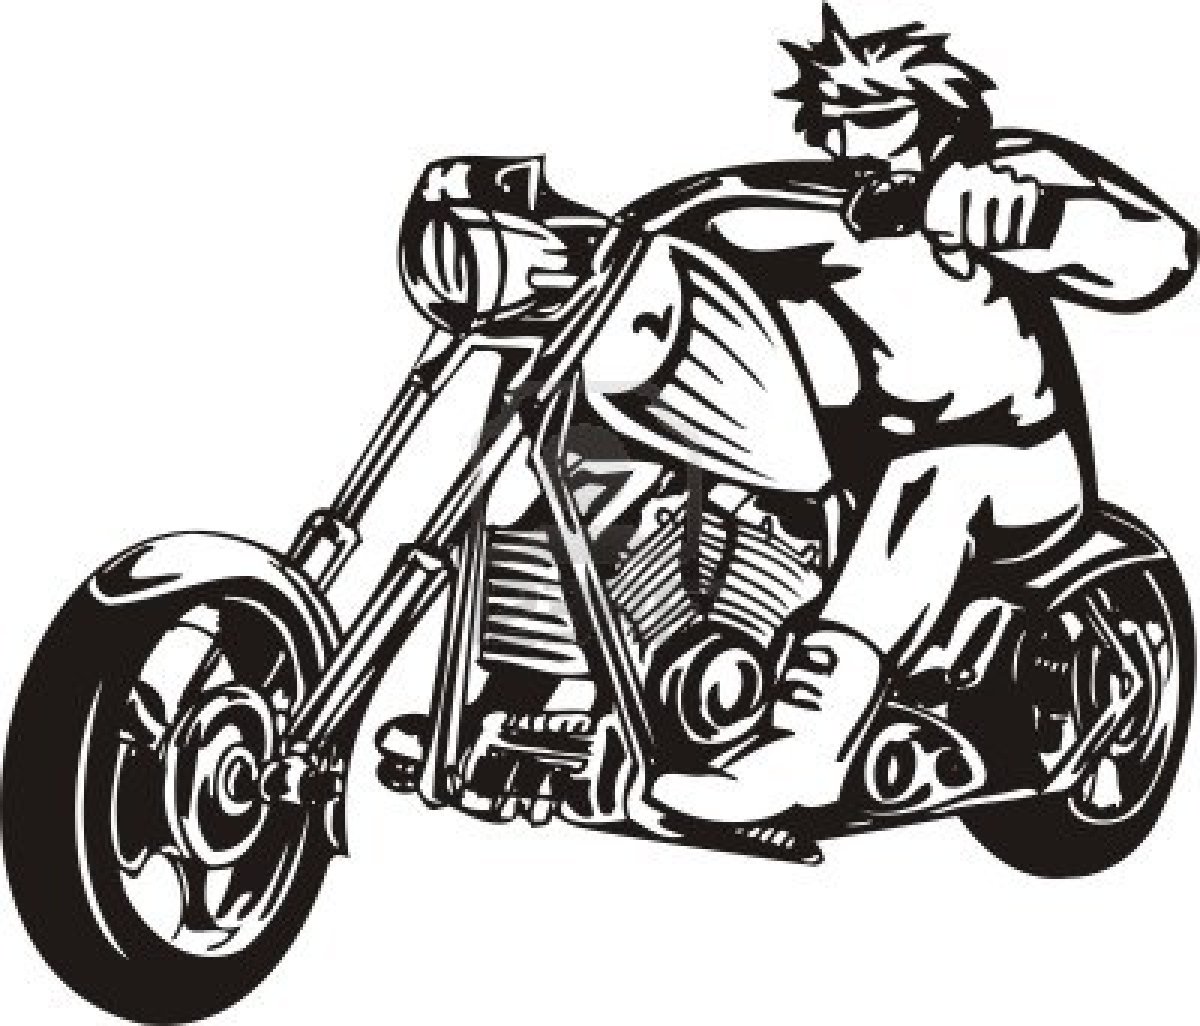 Motorcycle  black and white harley davidson motorcycle clip art cliparts and